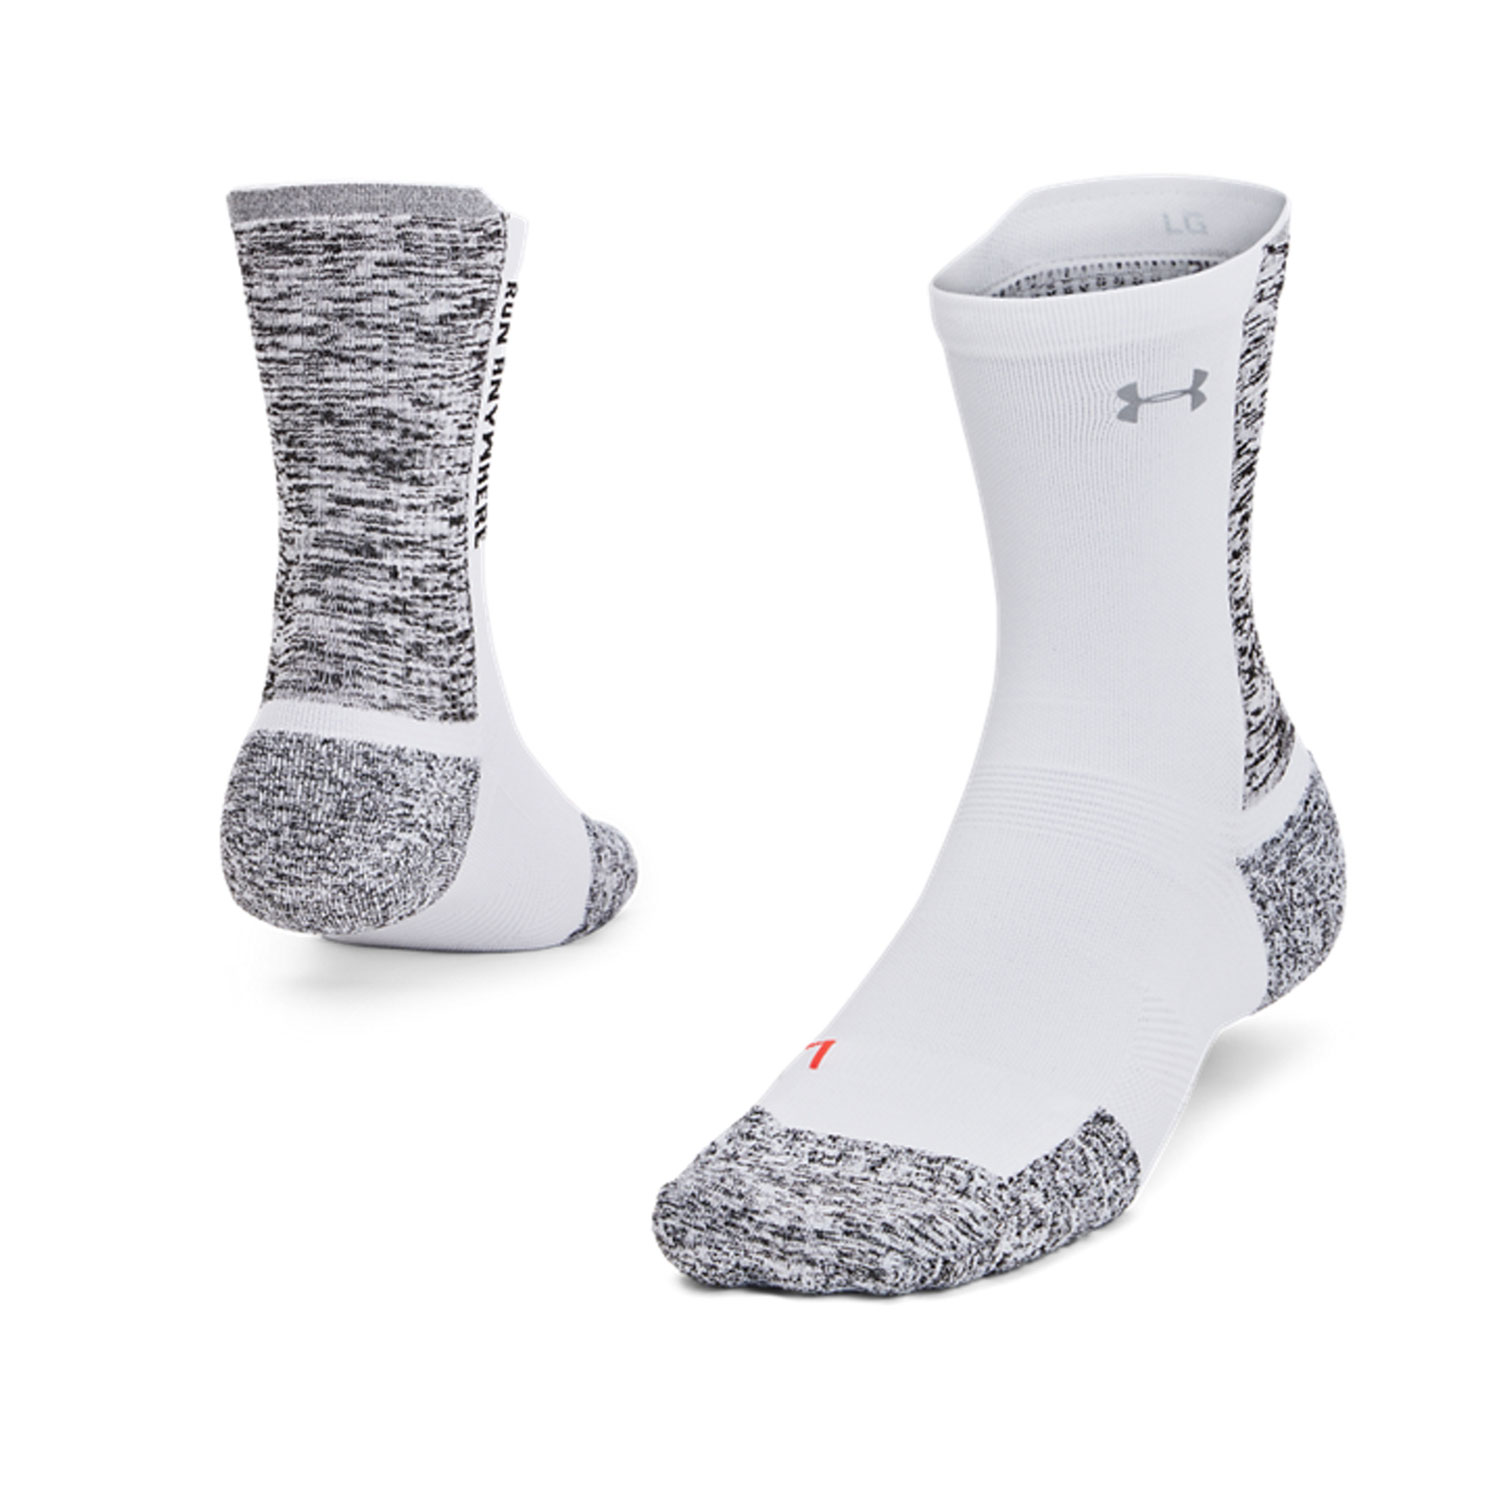 Under Armour ArmourDry Run Cushion Calcetines - White/Black/Reflective